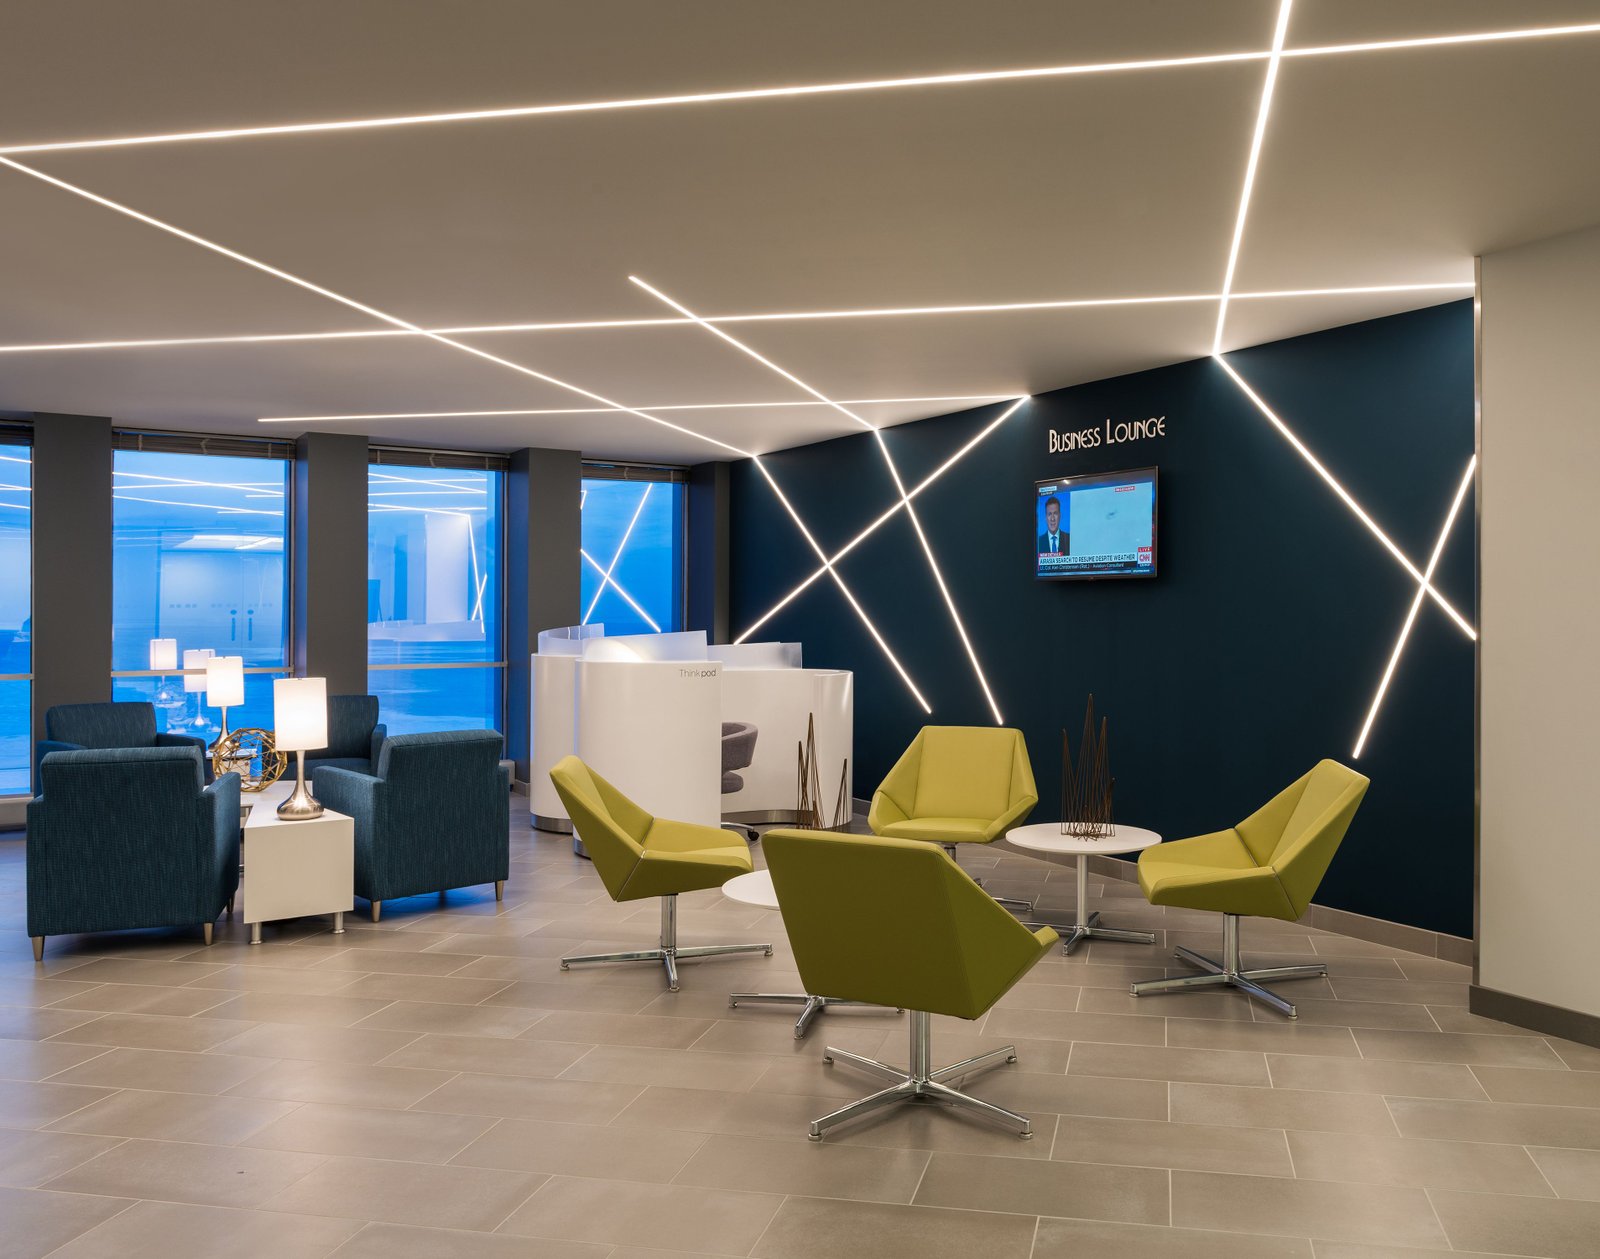 Bright lighting in office lobby space with a futuristic design